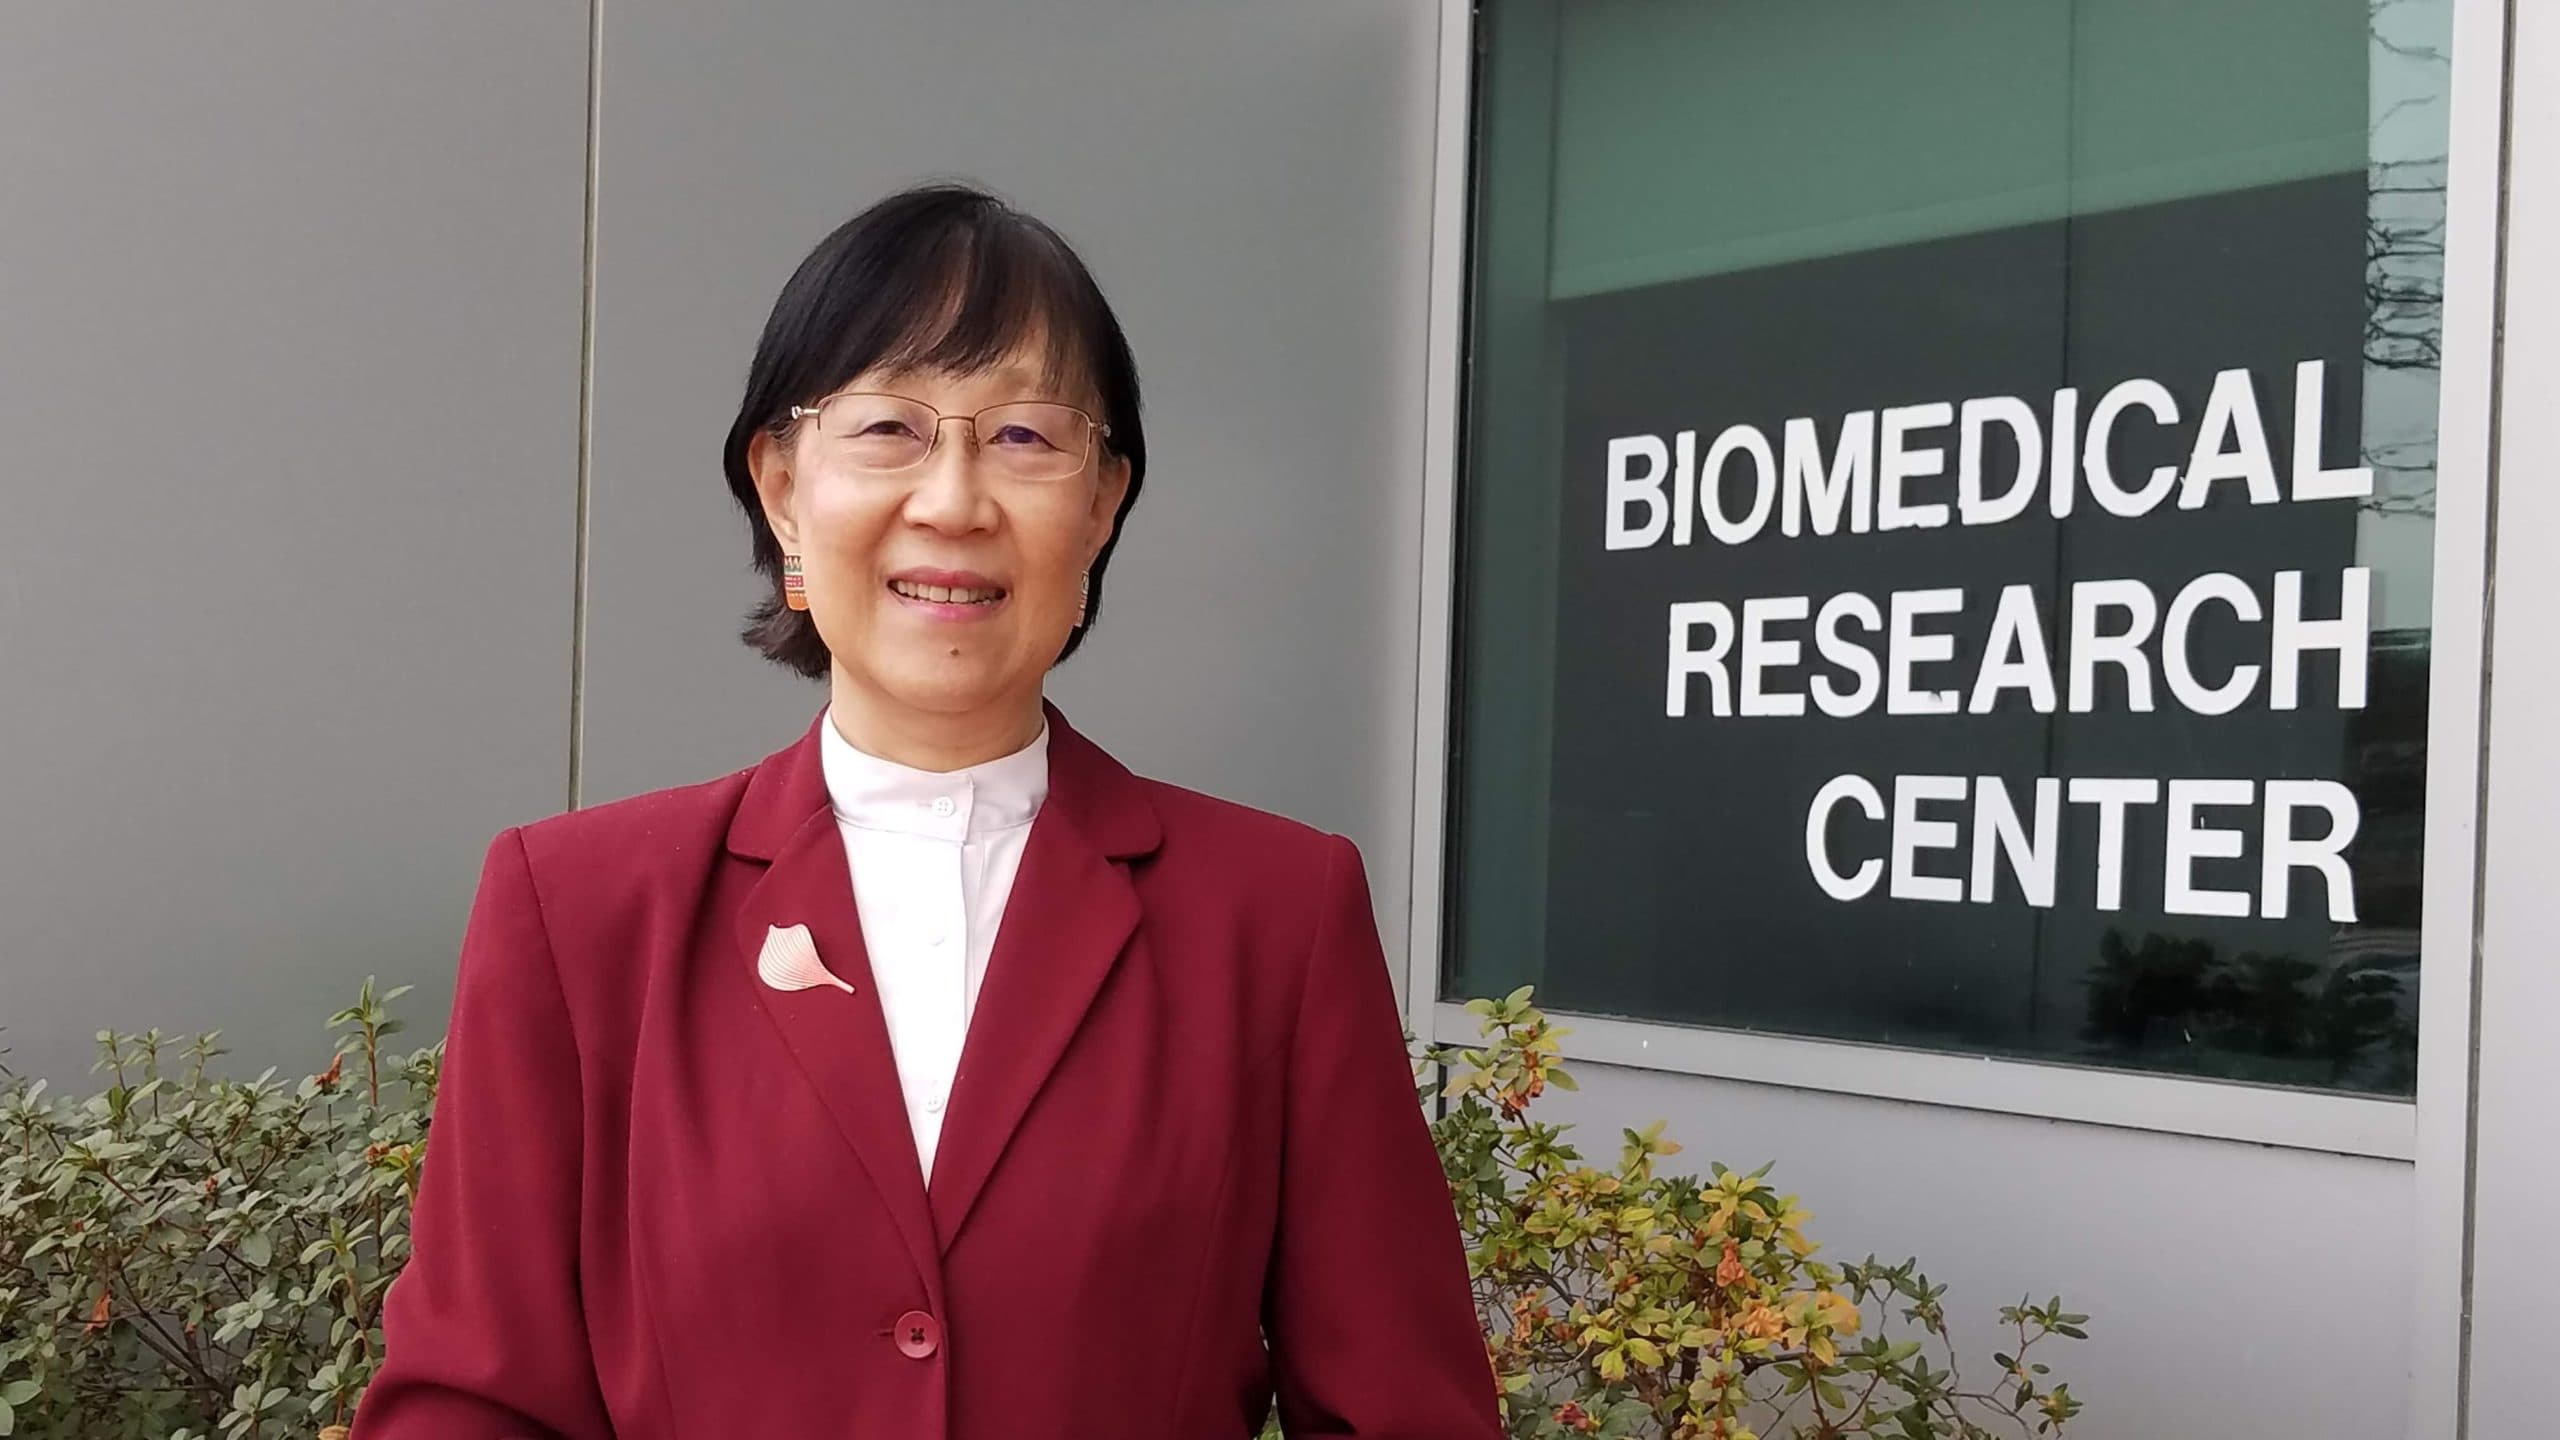 As UAMS vice chancellor for Research and Innovation, Shuk-Mei Ho, Ph.D., oversees the institution's research enterprise.